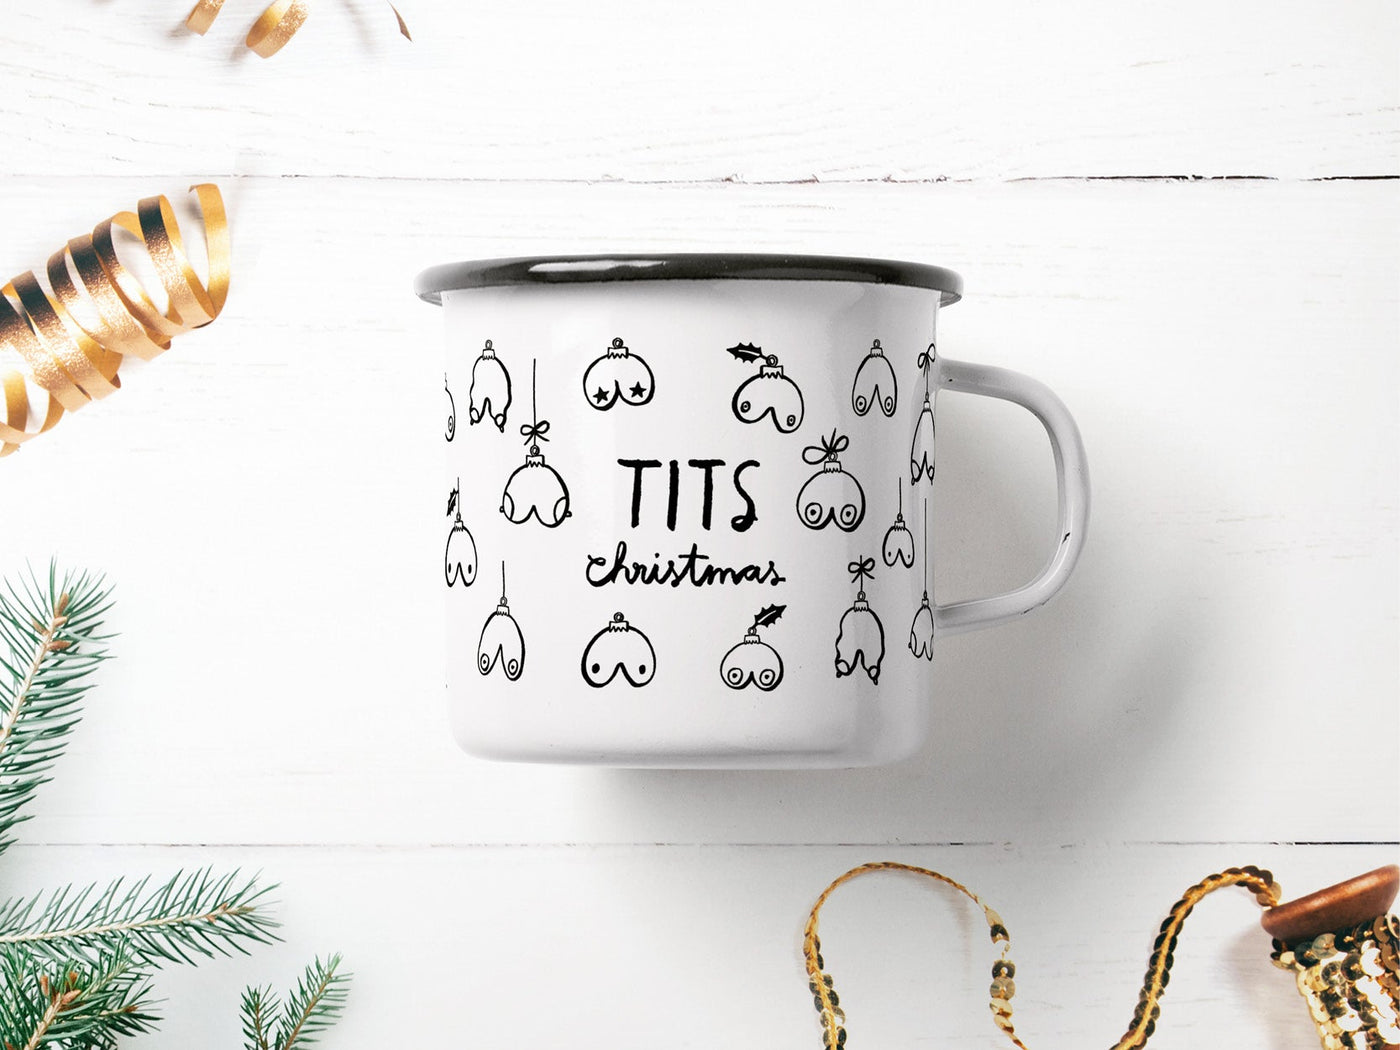 typealive - Tasse aus Emaille / Tits Christmas